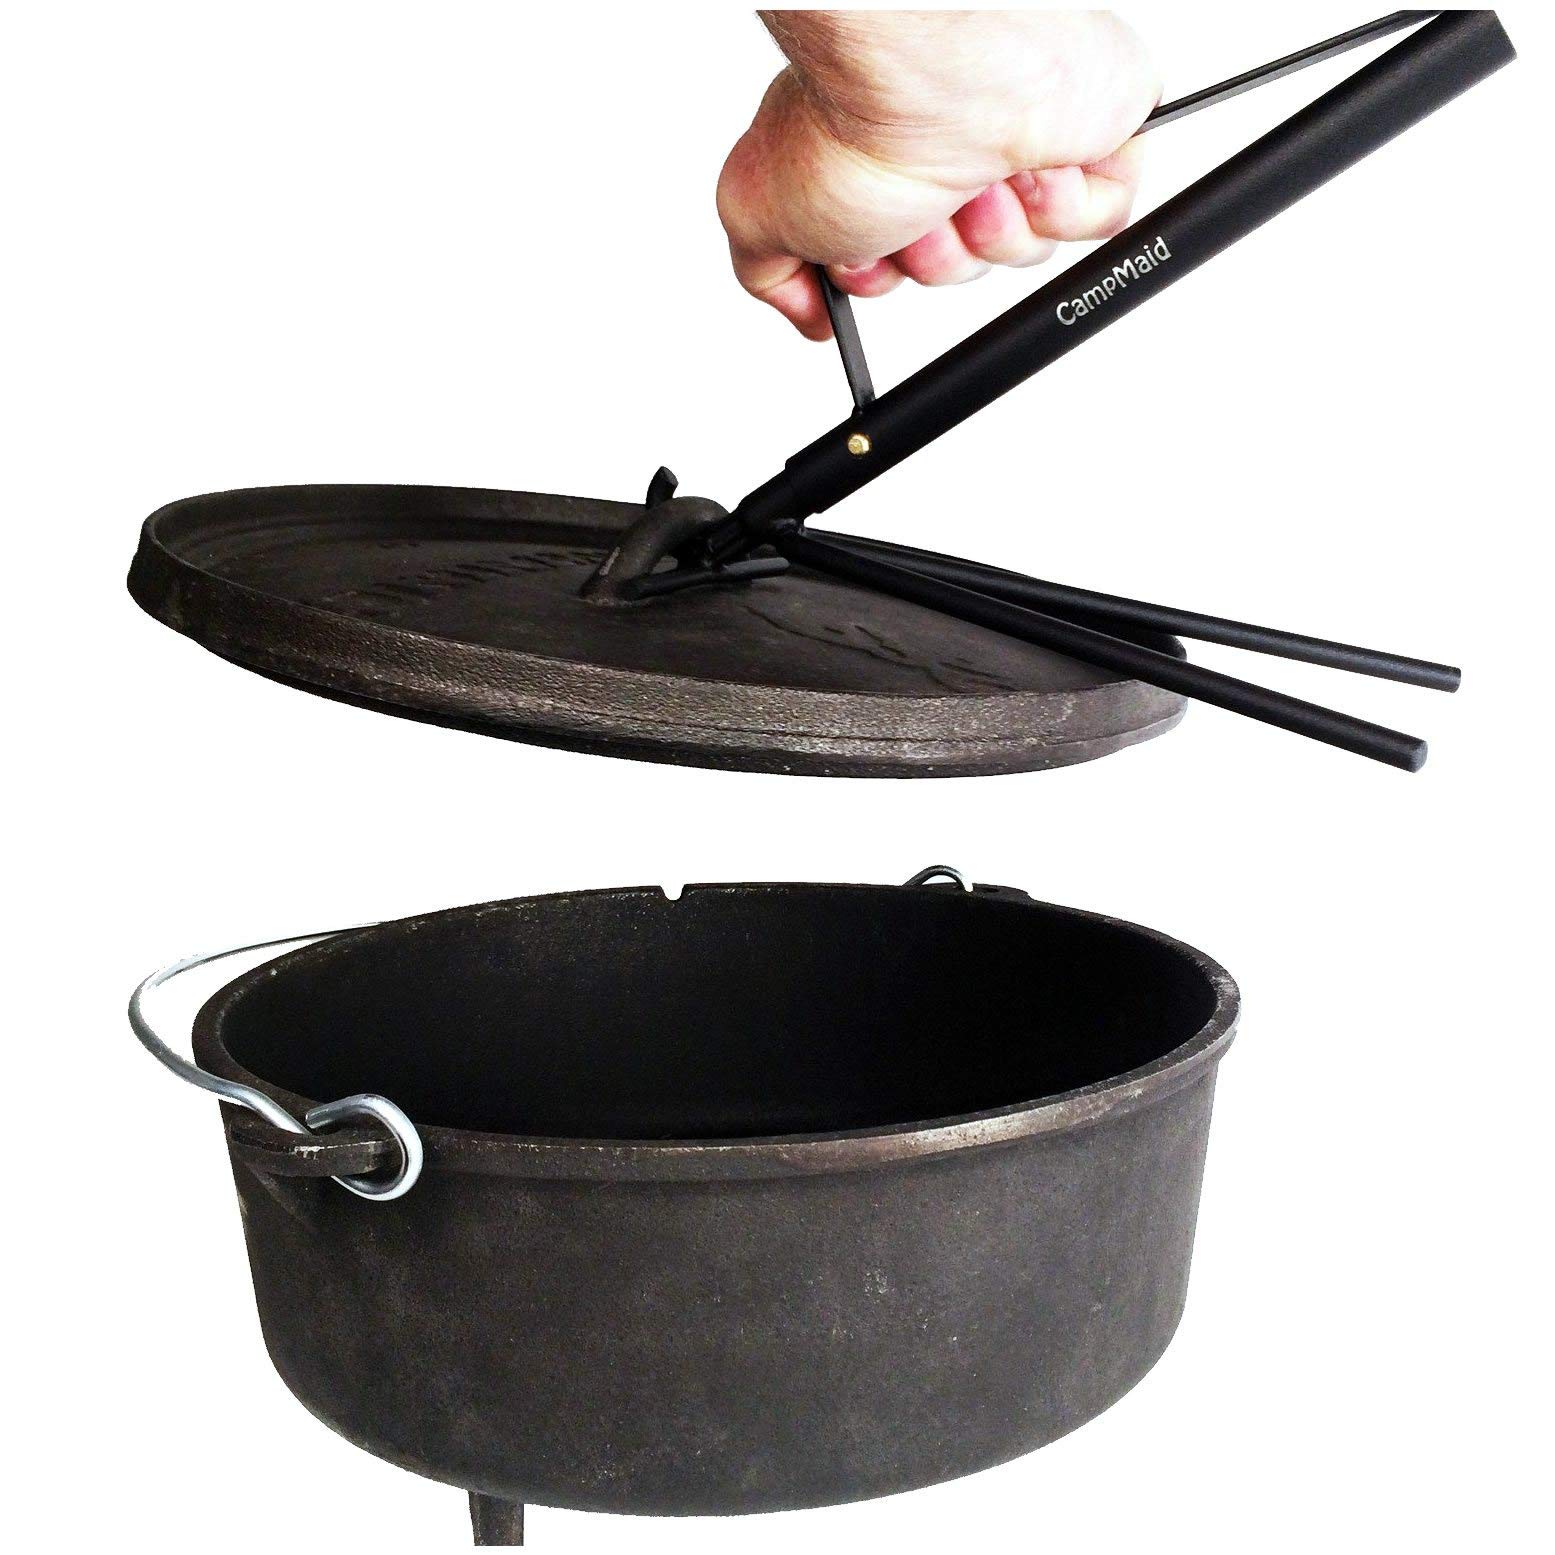 CampMaid Dutch Oven Kickstand & Lid Lifter - Durable Dutch Oven Lid Lifter - Lightweight & Portable Camp Cooking Accessories - Unique Camp Kitchen Equipment - Outdoor Cooking Essentials